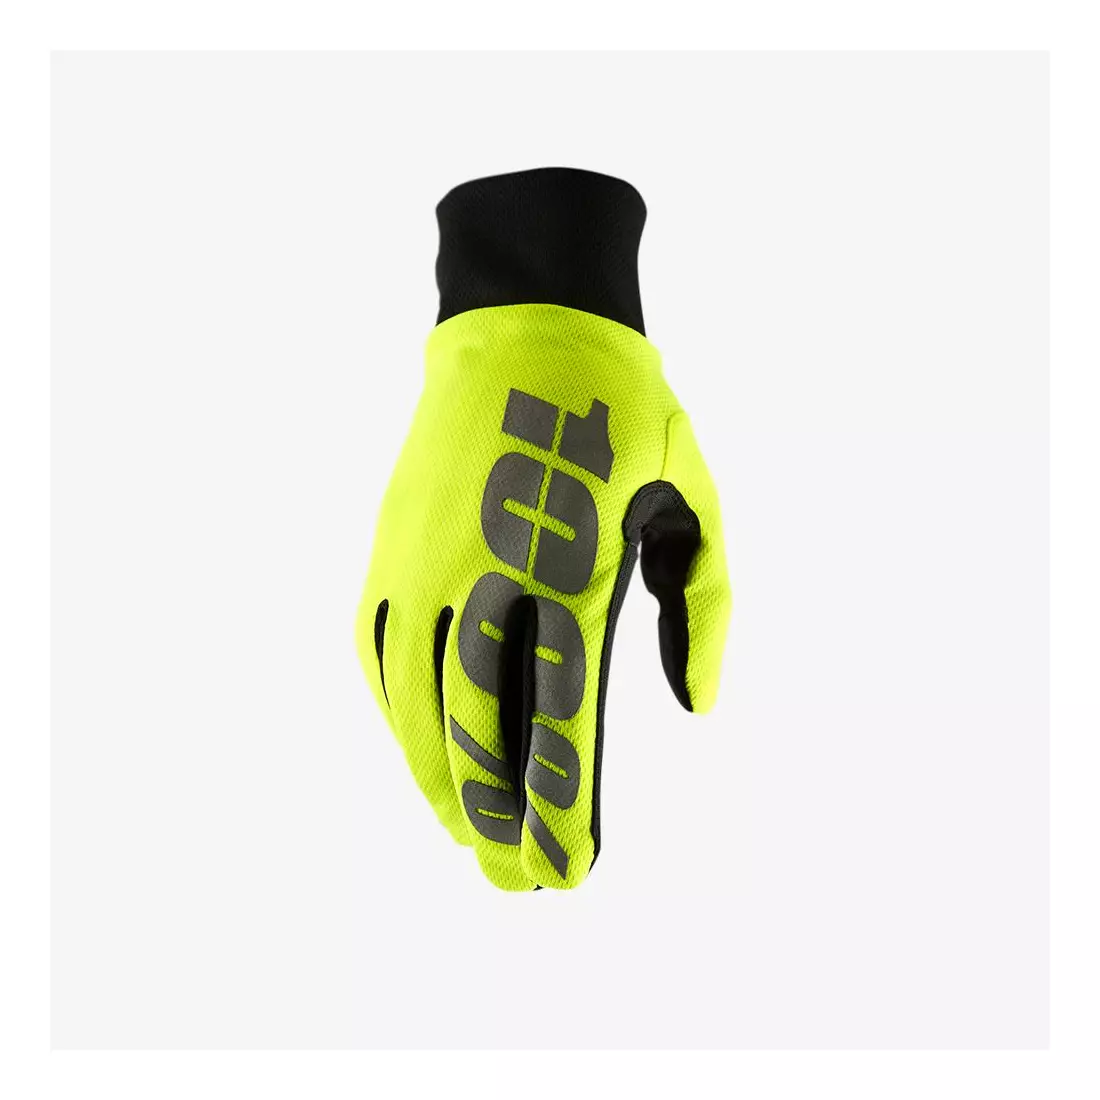 100% bicycle gloves hydromatic neon yellow STO-10011-004-12